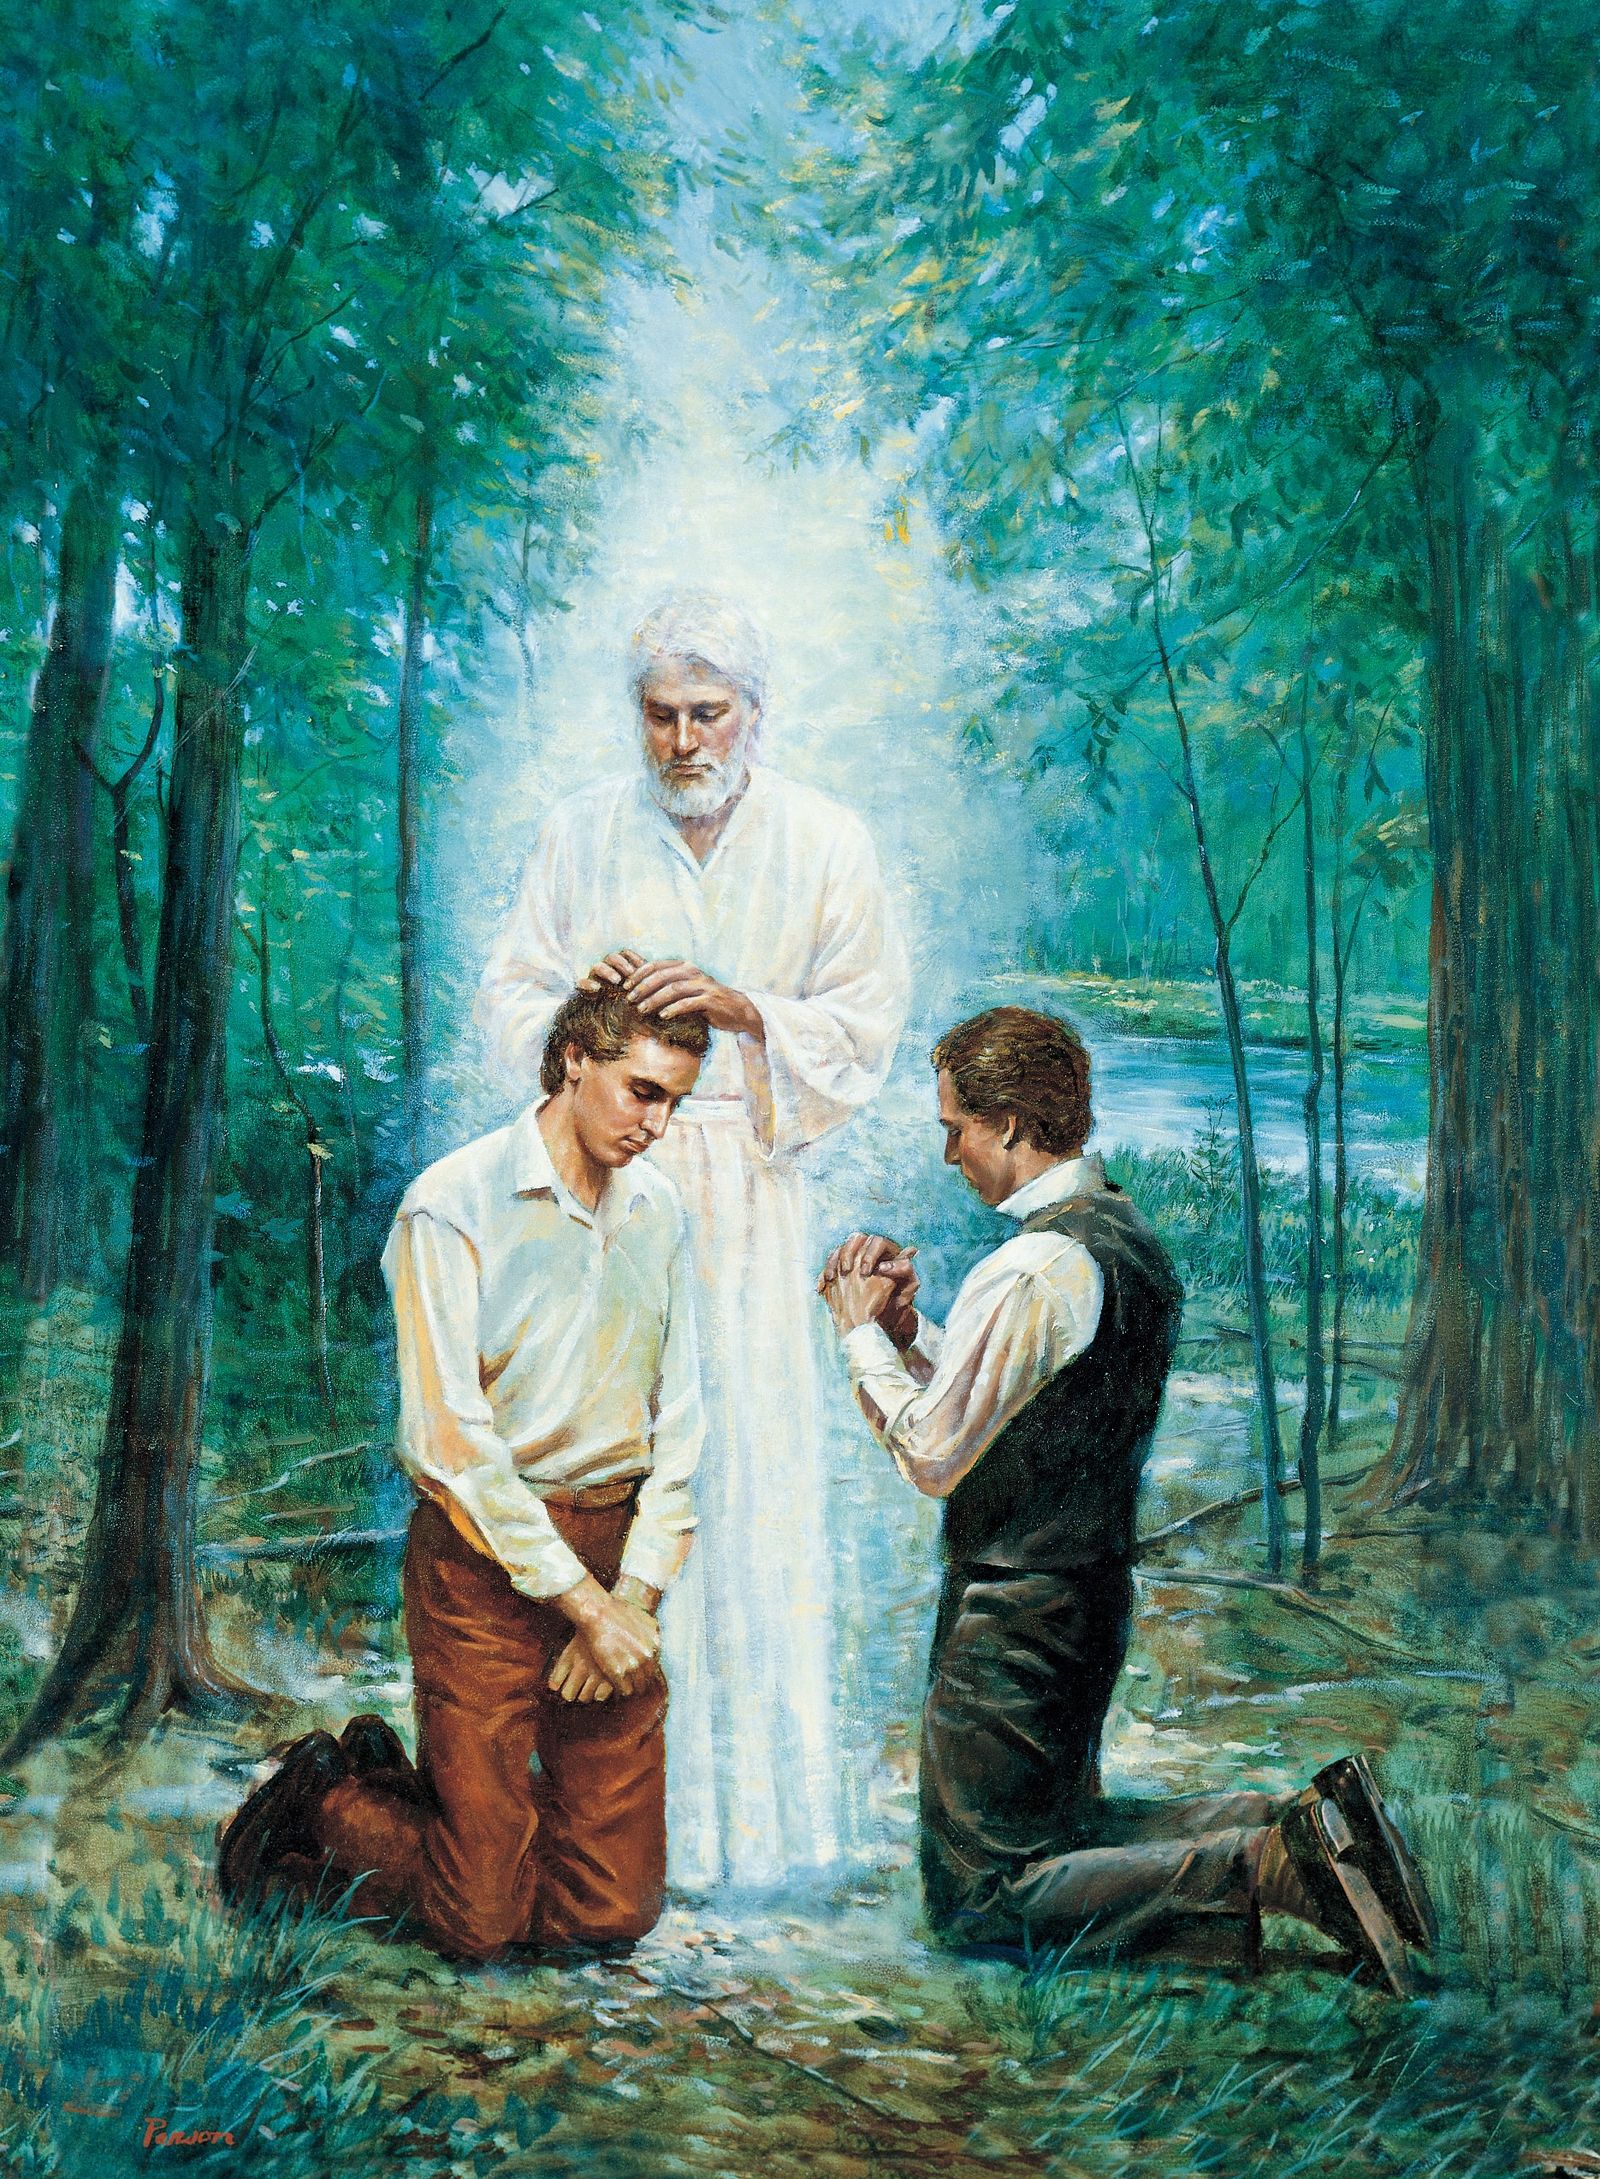 John the Baptist Conferring the Aaronic Priesthood (The Restoration of the Aaronic Priesthood), by Del Parson (62013); GAK 407; GAB 93; Primary manual 3-11; Primary manual 5-15; Primary manual 6-52; Doctrine and Covenants 13; Joseph Smith—History 1:68–73